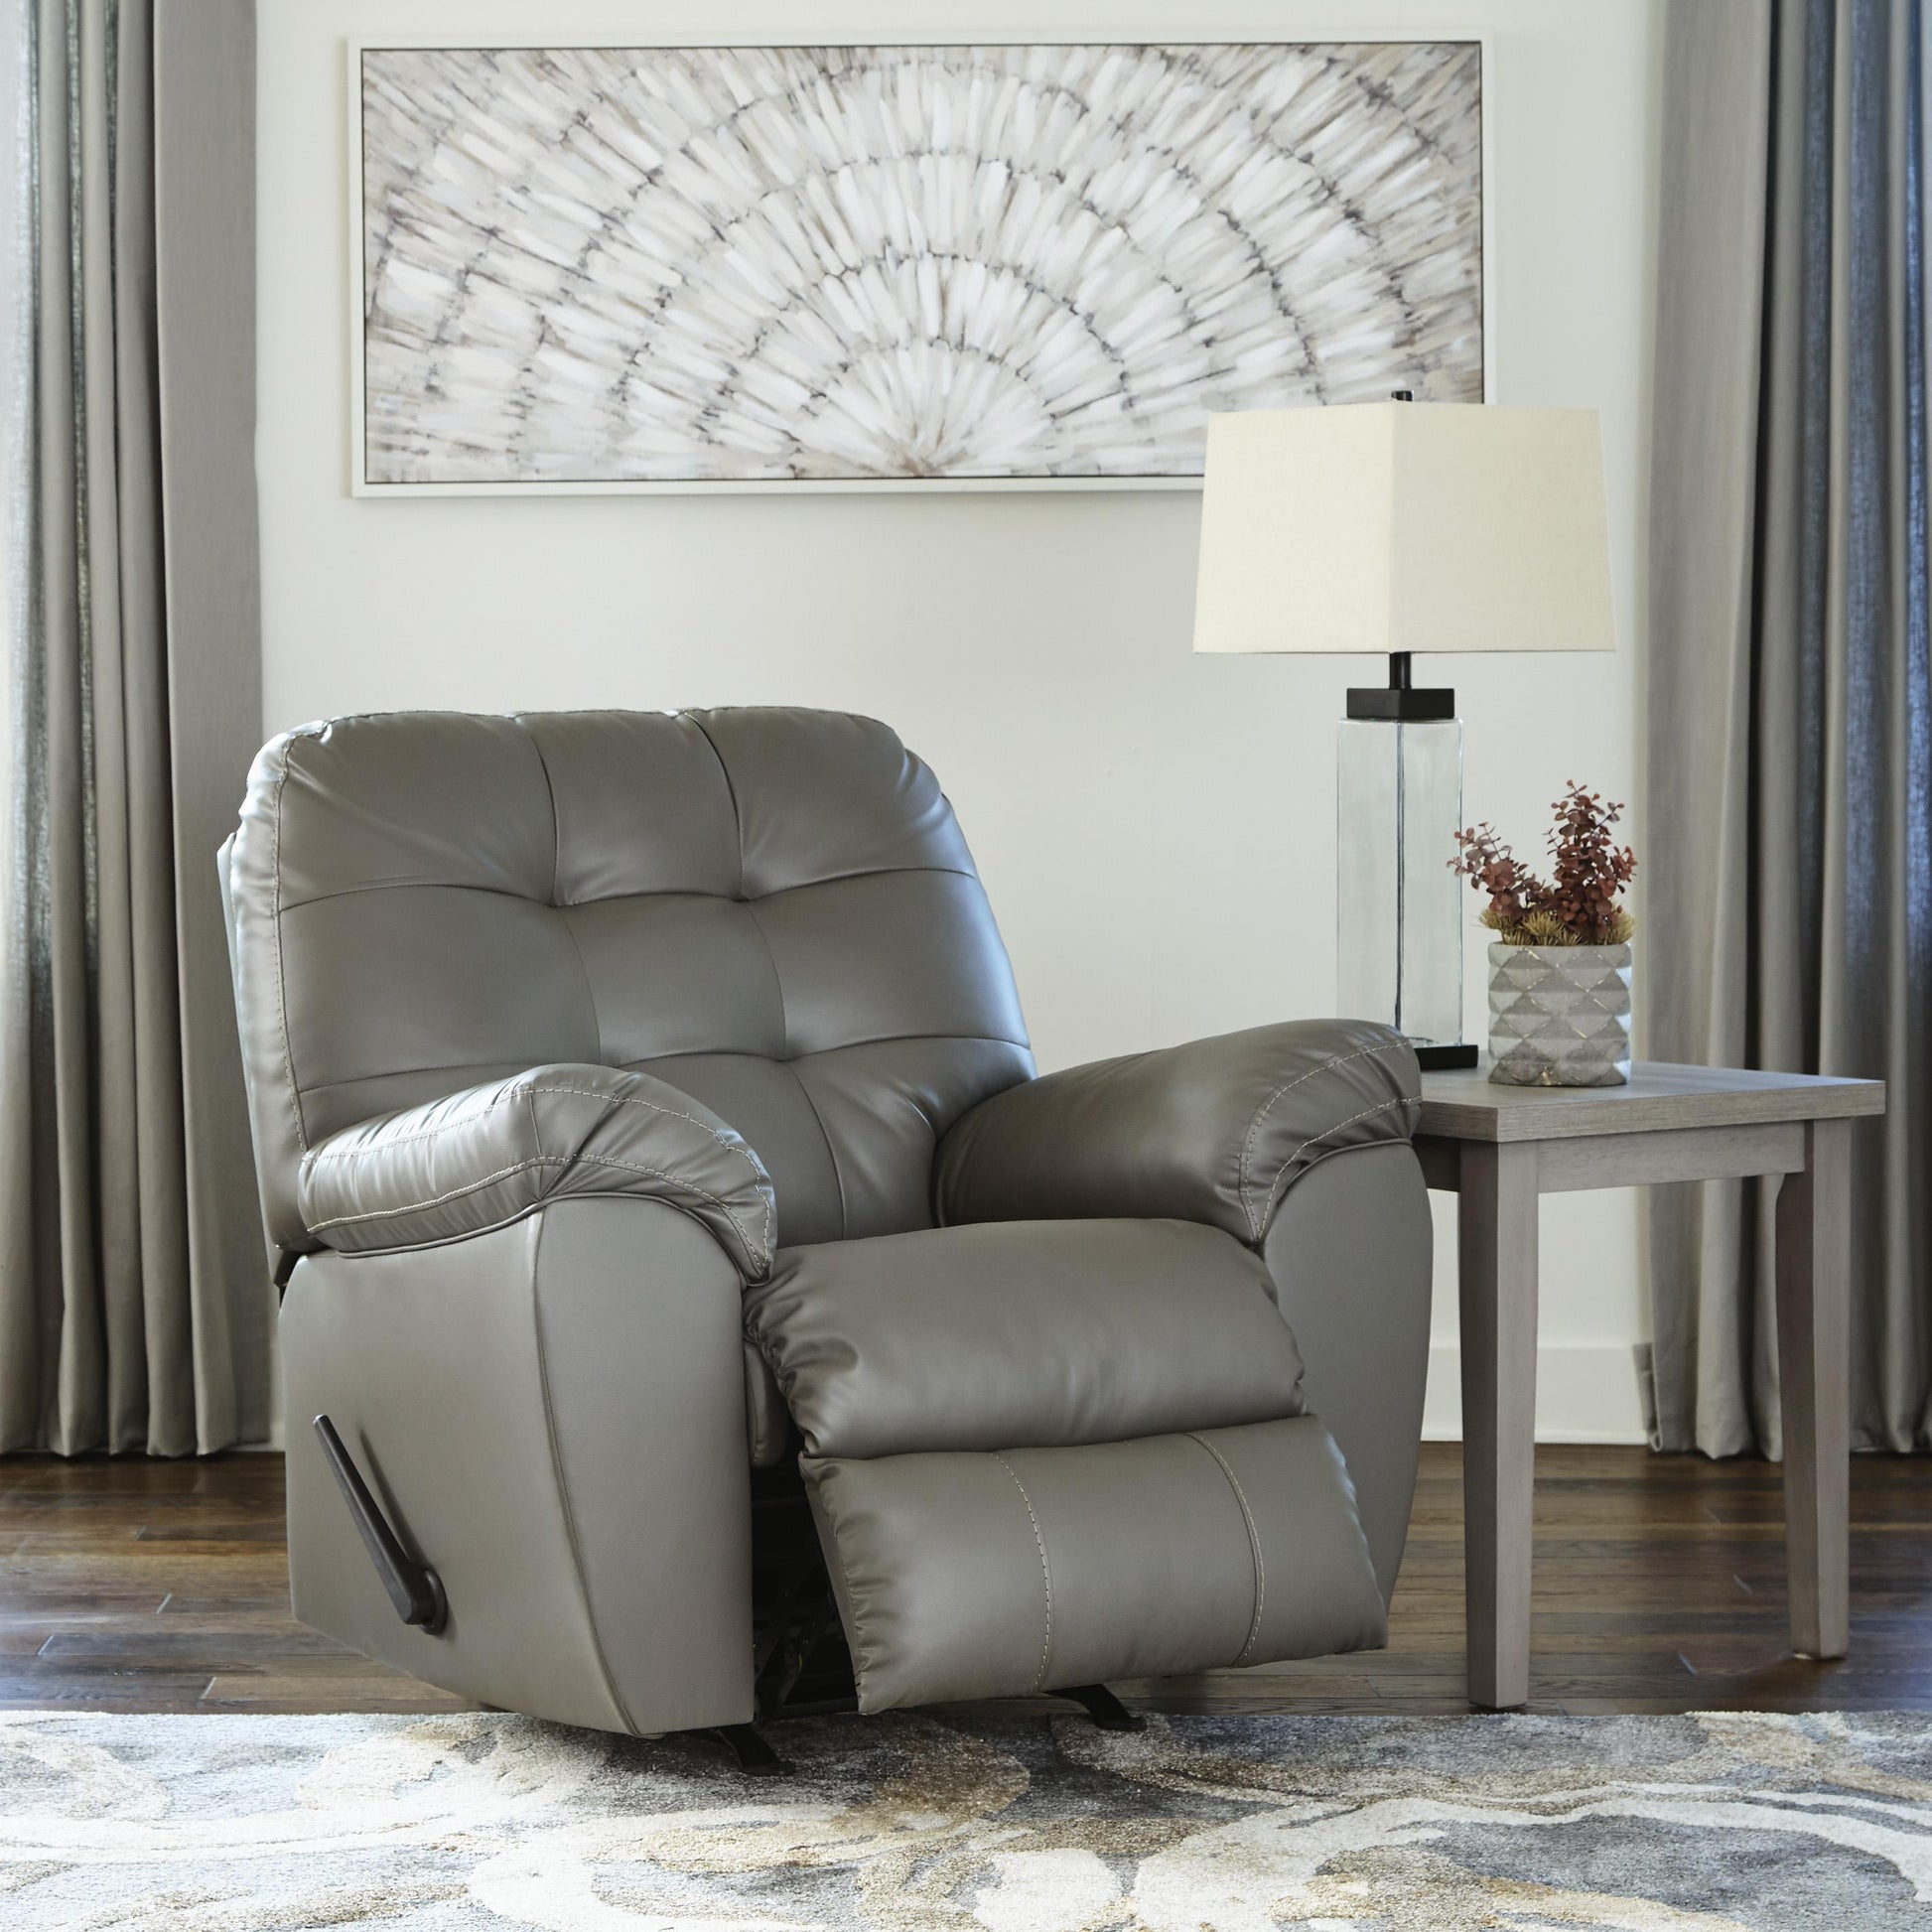 Signature Design by Ashley Donlen Rocker Leather Look Recliner 5970225 IMAGE 7